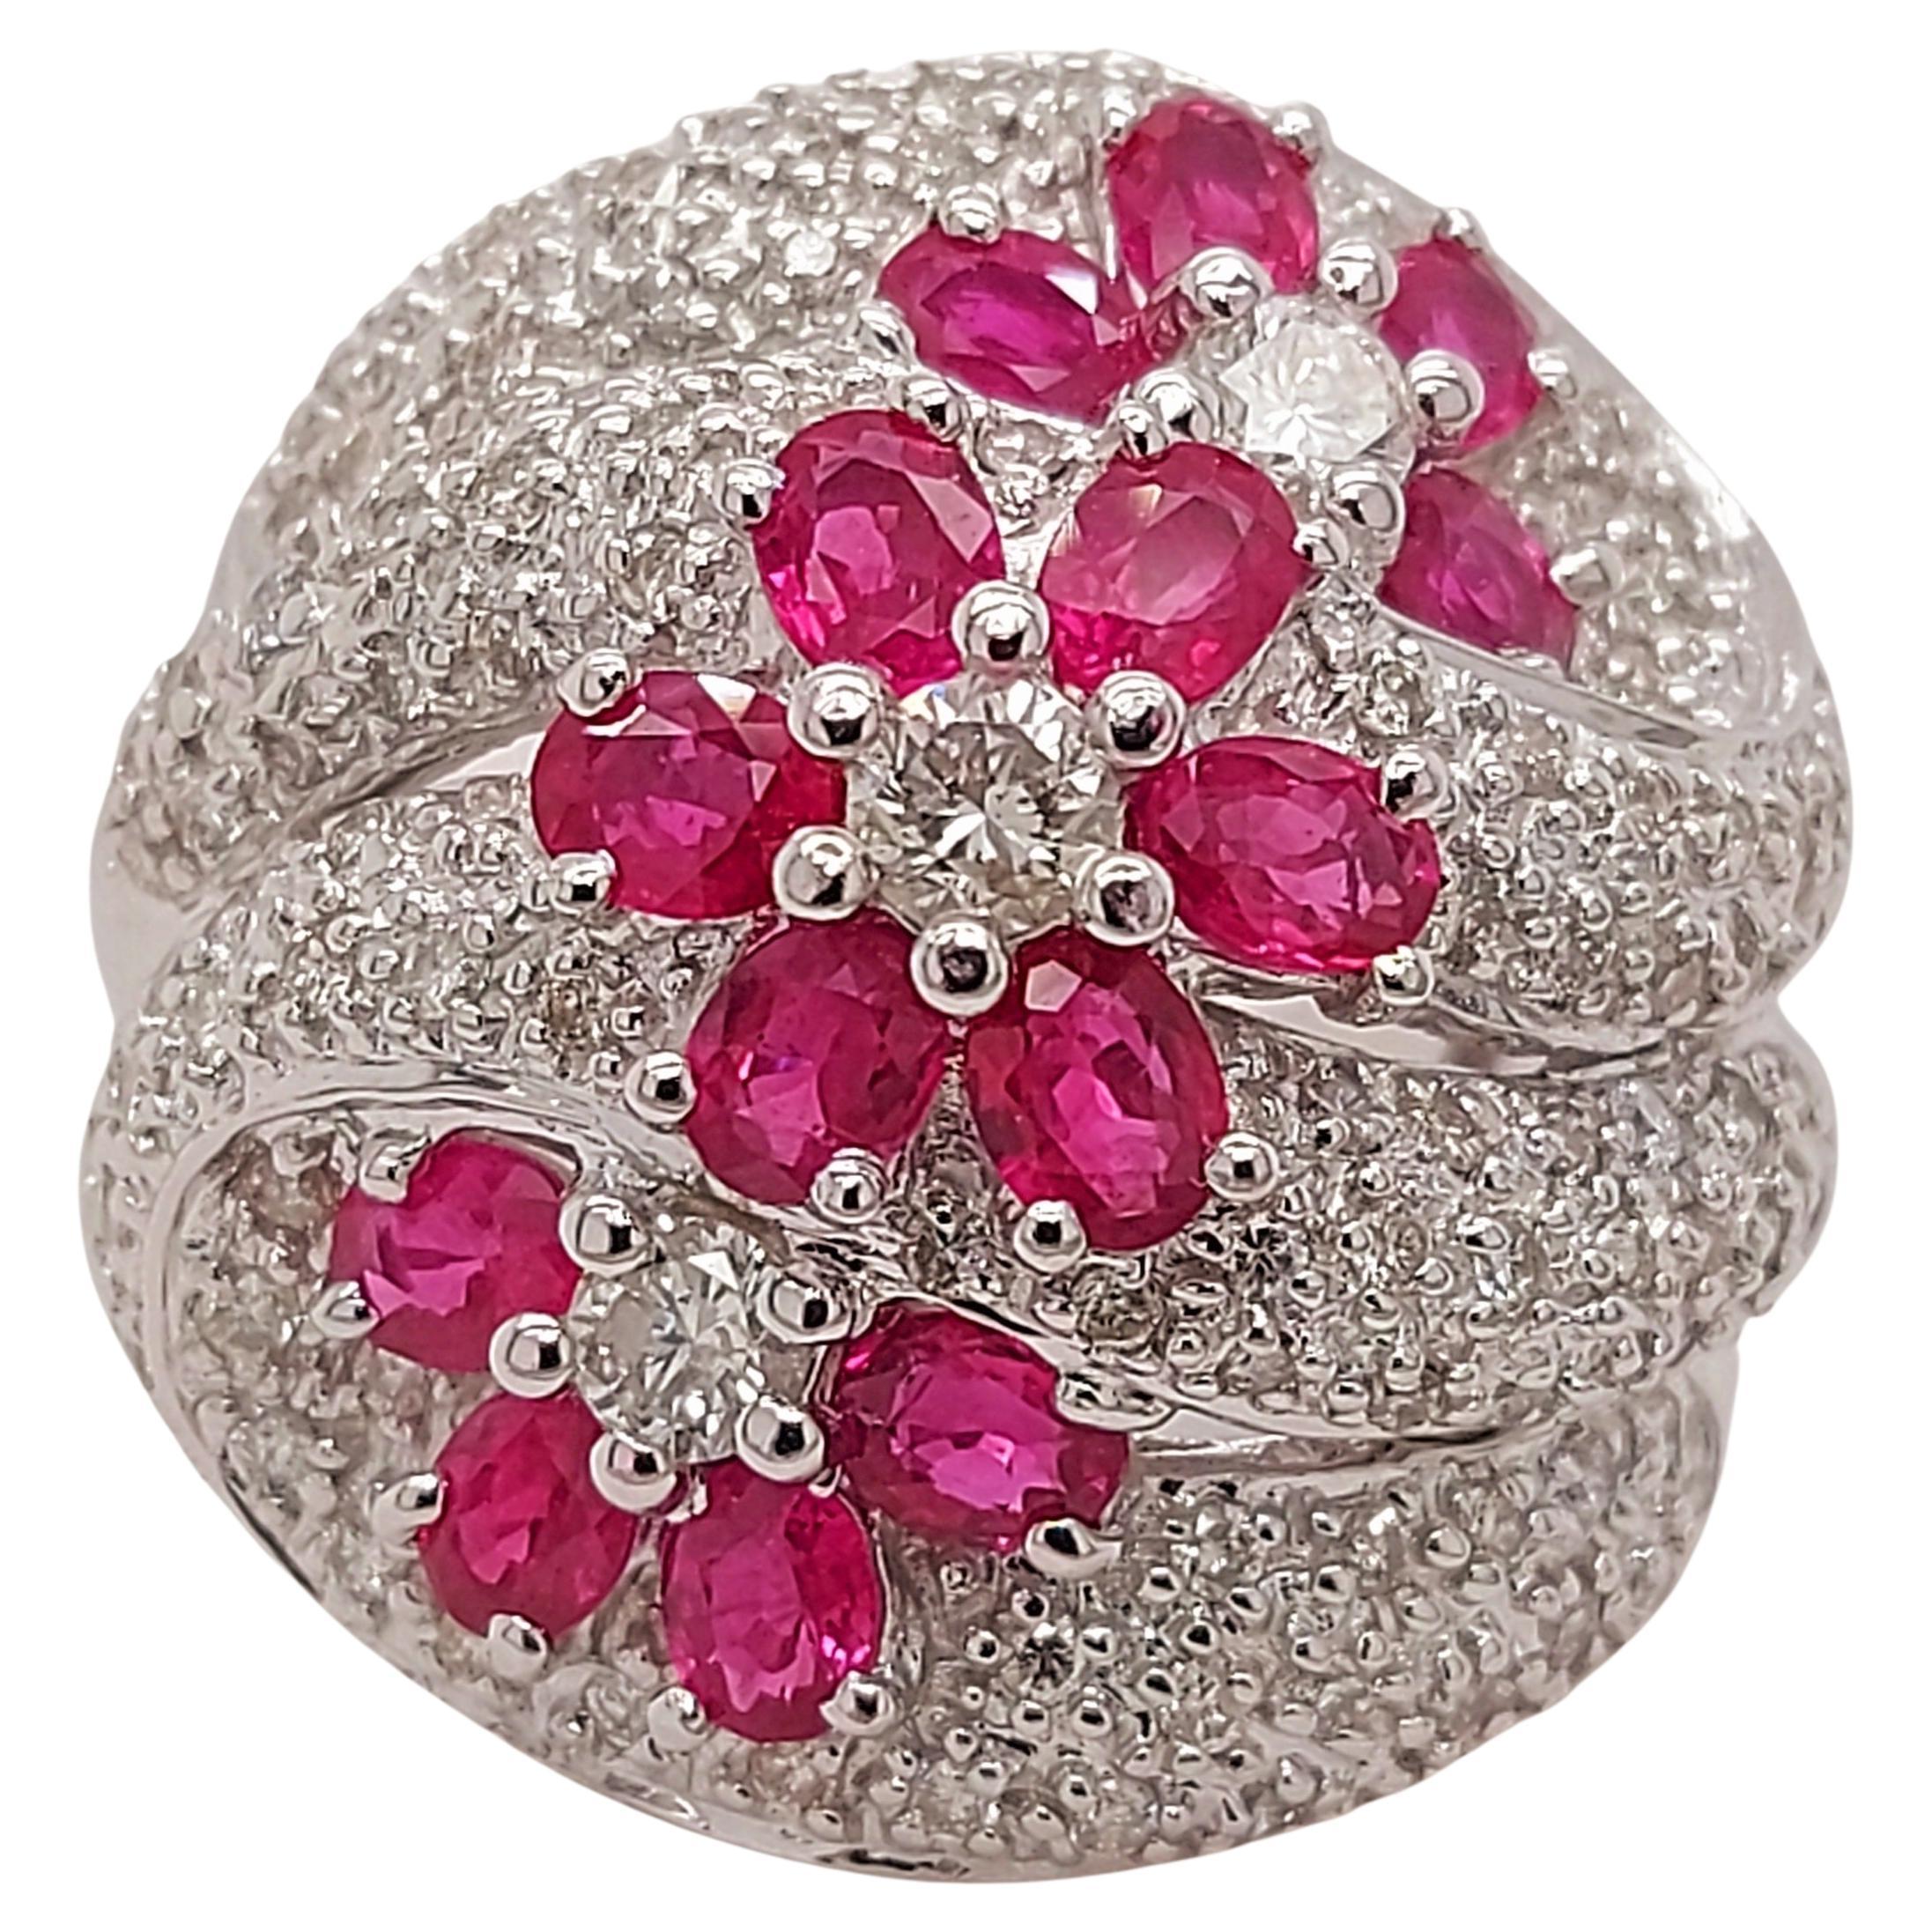 Gorgeous 18kt White Gold Ring with Diamonds and Rubies

Diamonds: 112 small diamonds together 1.86ct, 3 big diamonds together 0.60 ct all diamonds together 2.46ct diamonds

Ruby: 14 rubies total 3.3 ct

Material: 18kt White Gold

Ring size: 56 EU /